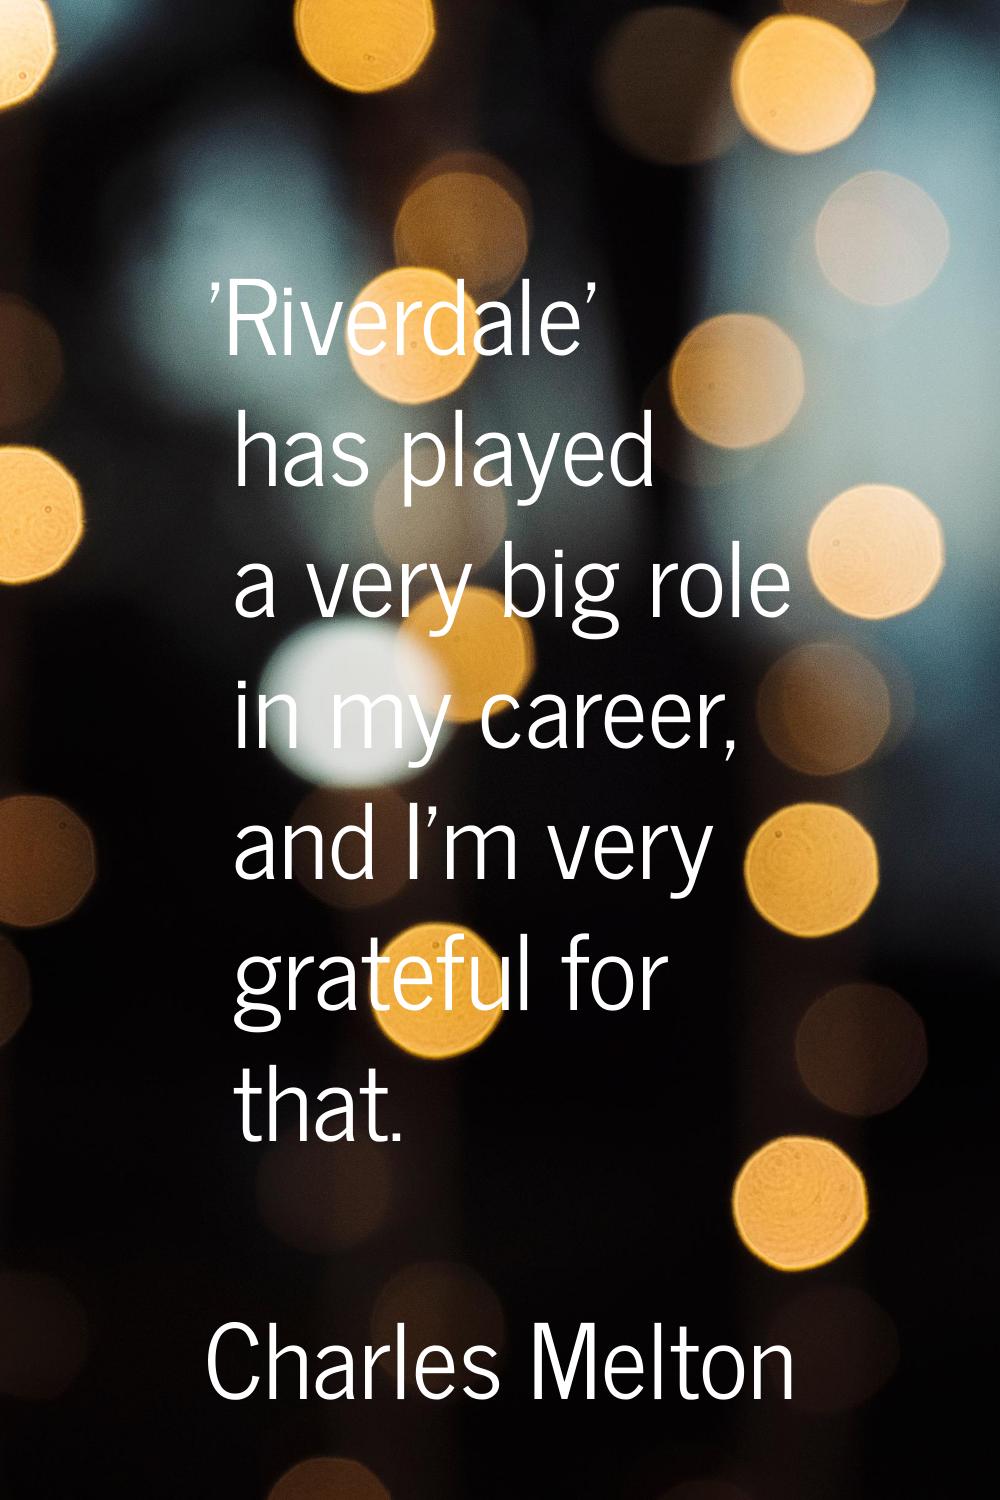 'Riverdale' has played a very big role in my career, and I'm very grateful for that.